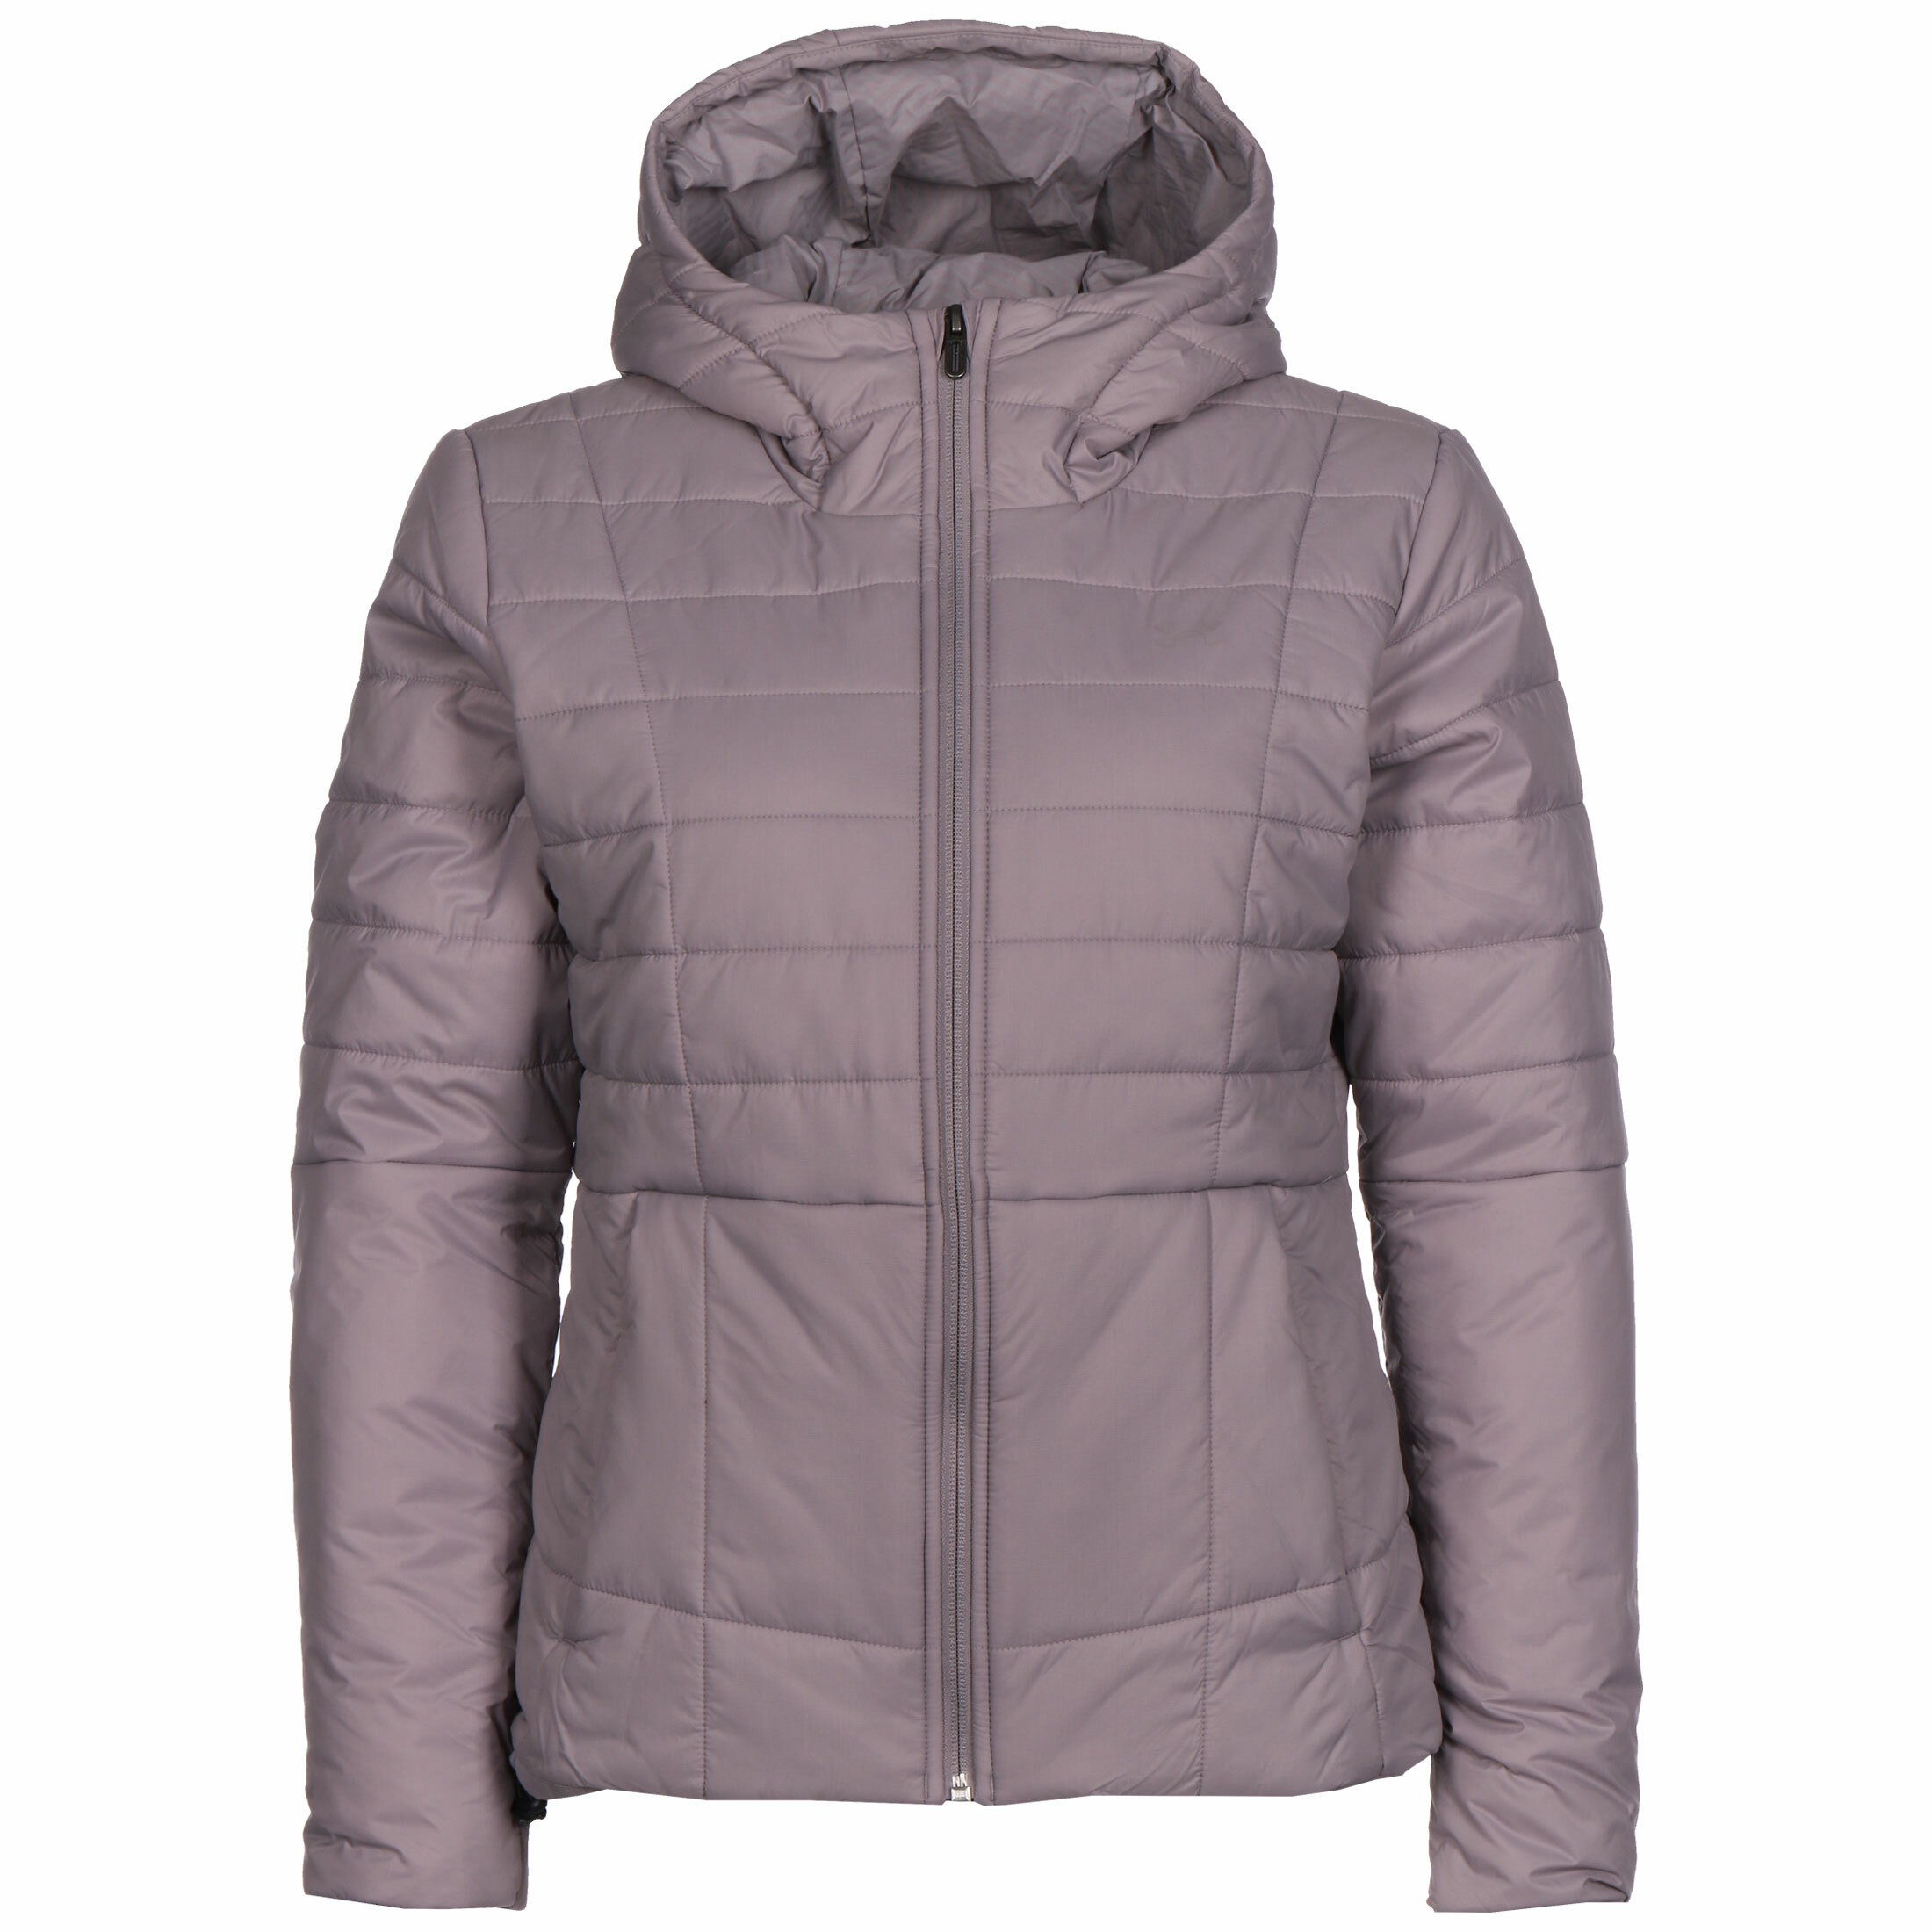 Under Armour Insulated Hooded Jacke Damen